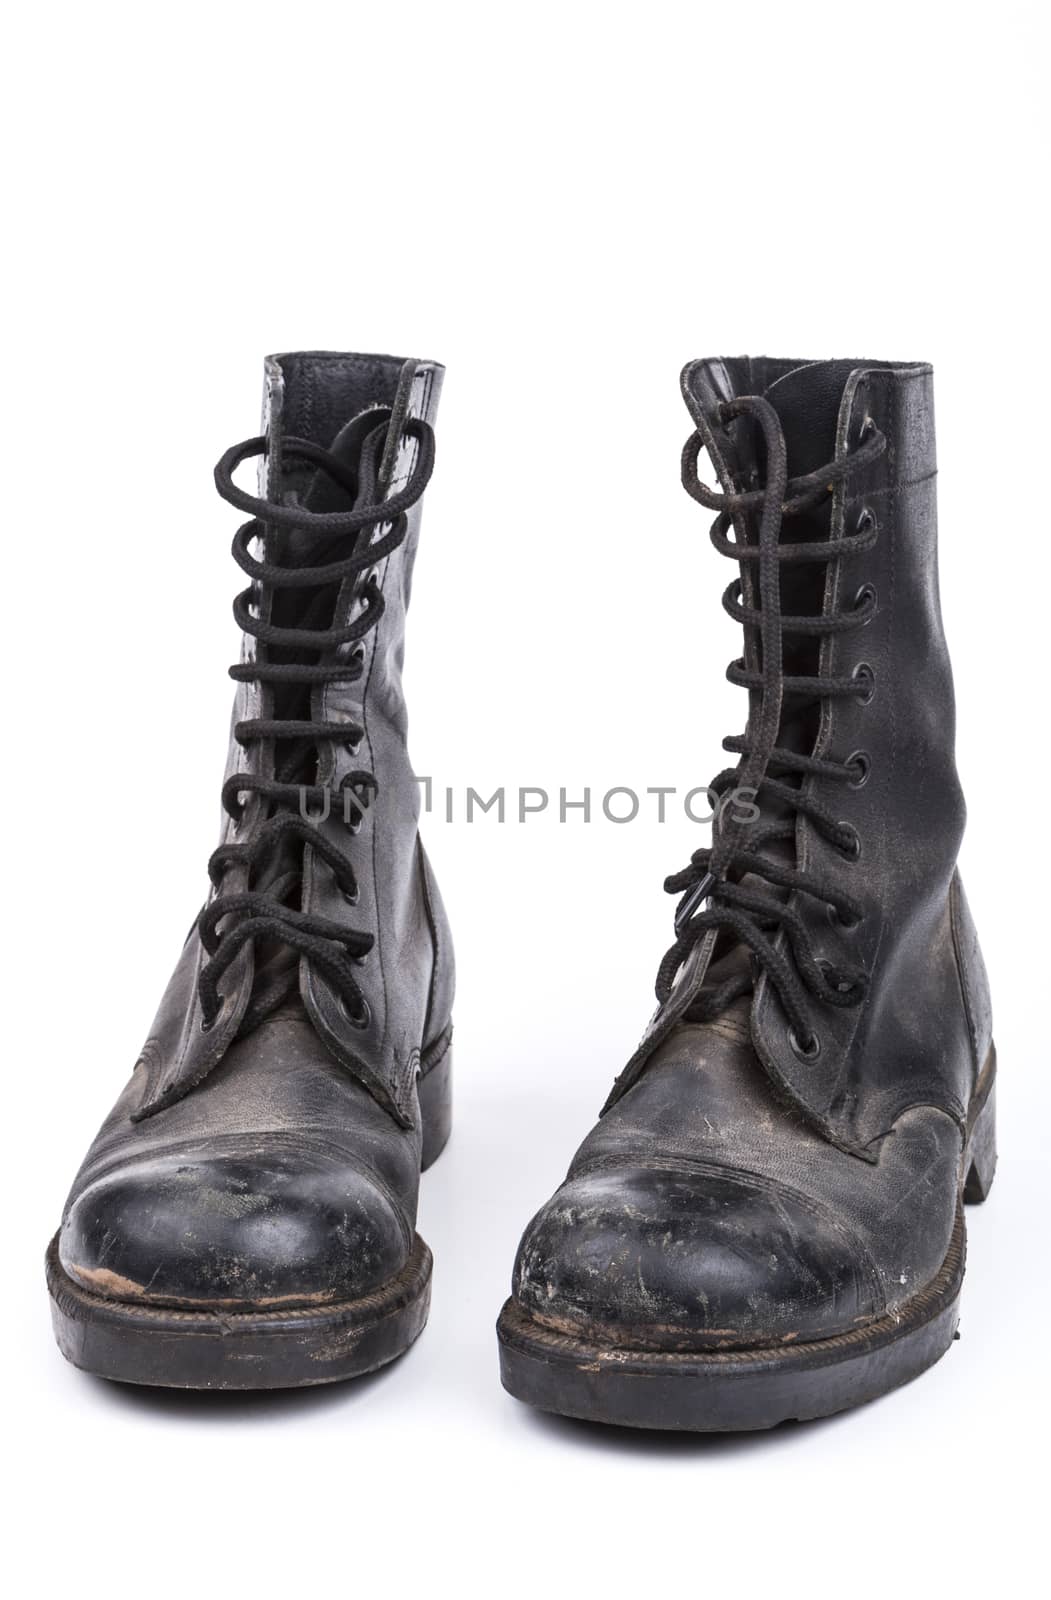 Black Dirty army boots isolated on white background